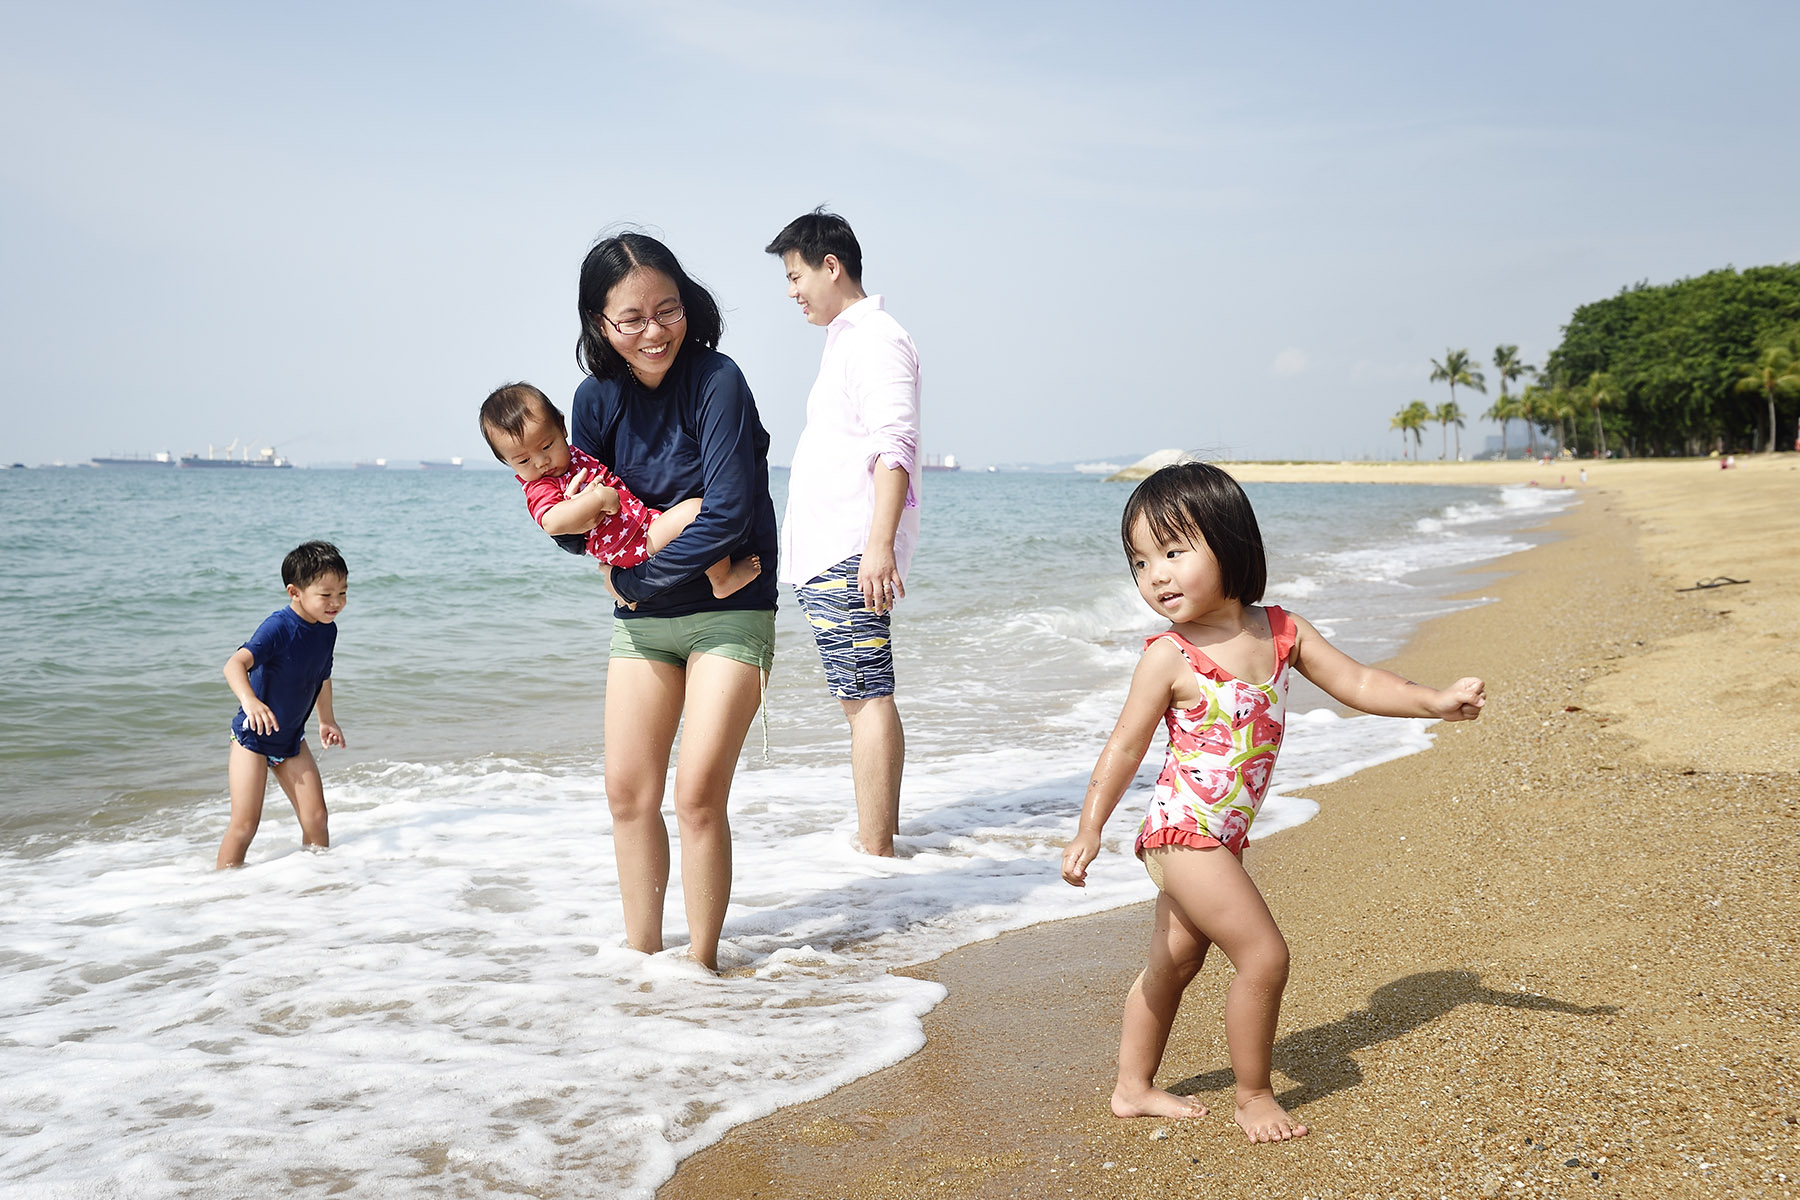 A family of four playing on an empty beach in the water